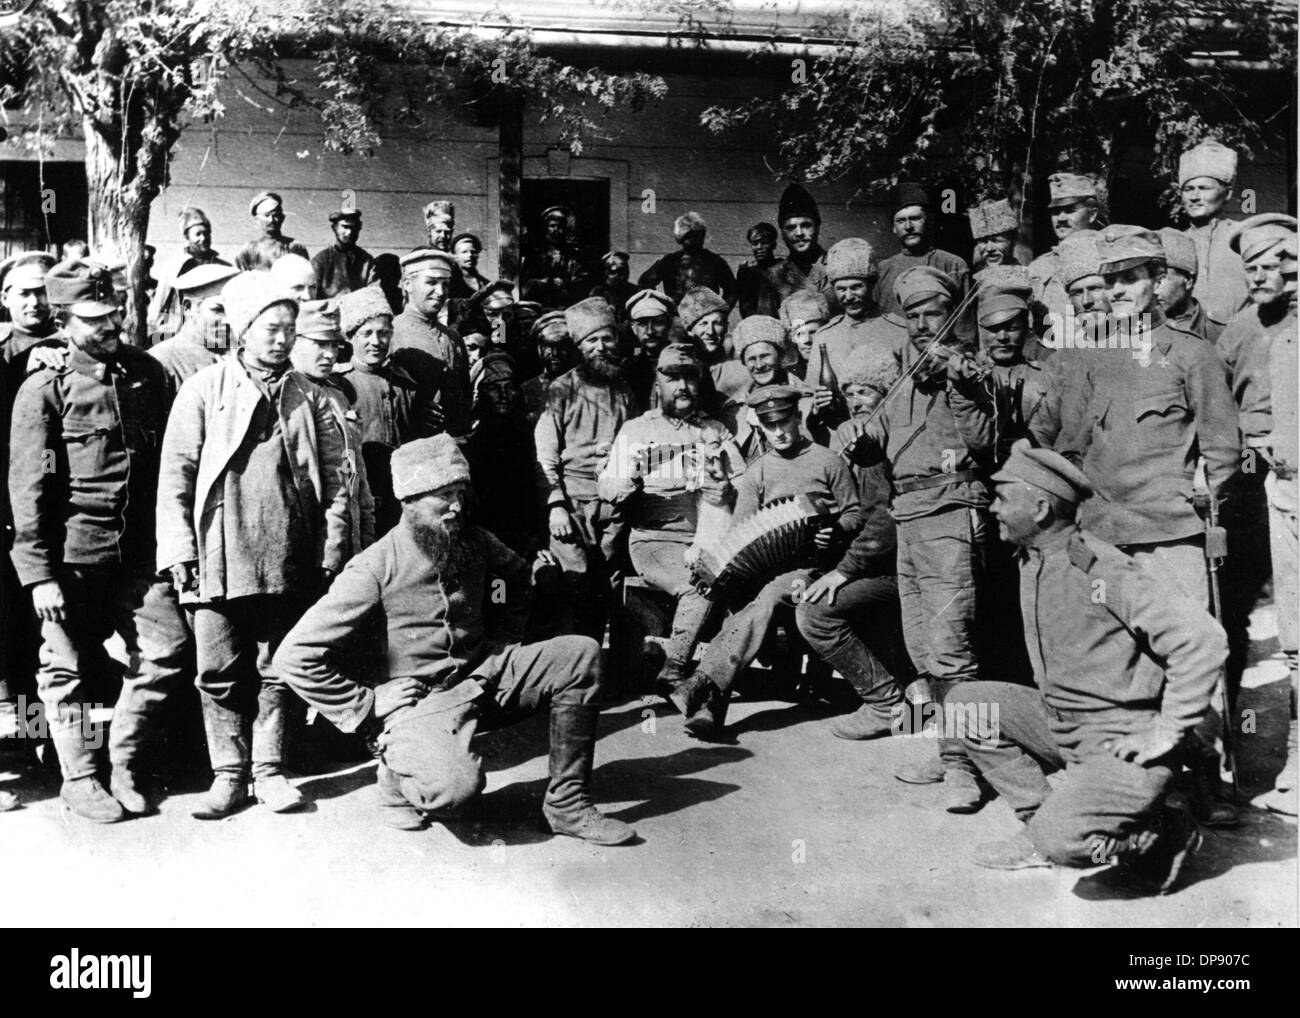 Russian prisoners of war in a camp in Galicia (undated). Set off by the deadly shots on Austrian heir to the throne Franz Ferdinand by Serbian nationalists on the 28th of June in 1914 in Sarajevo, World War I broke out. During World War I, Germany, Austria, Austria-Hungary as well as later Turkey and Bulgary fought against Britain, France and Russia. The sad end result in 1918 comprised roughly 8.5 million soldiers killed in action, more than 21 million wounded and almost 8 million prisoners of war and missing people. Stock Photo